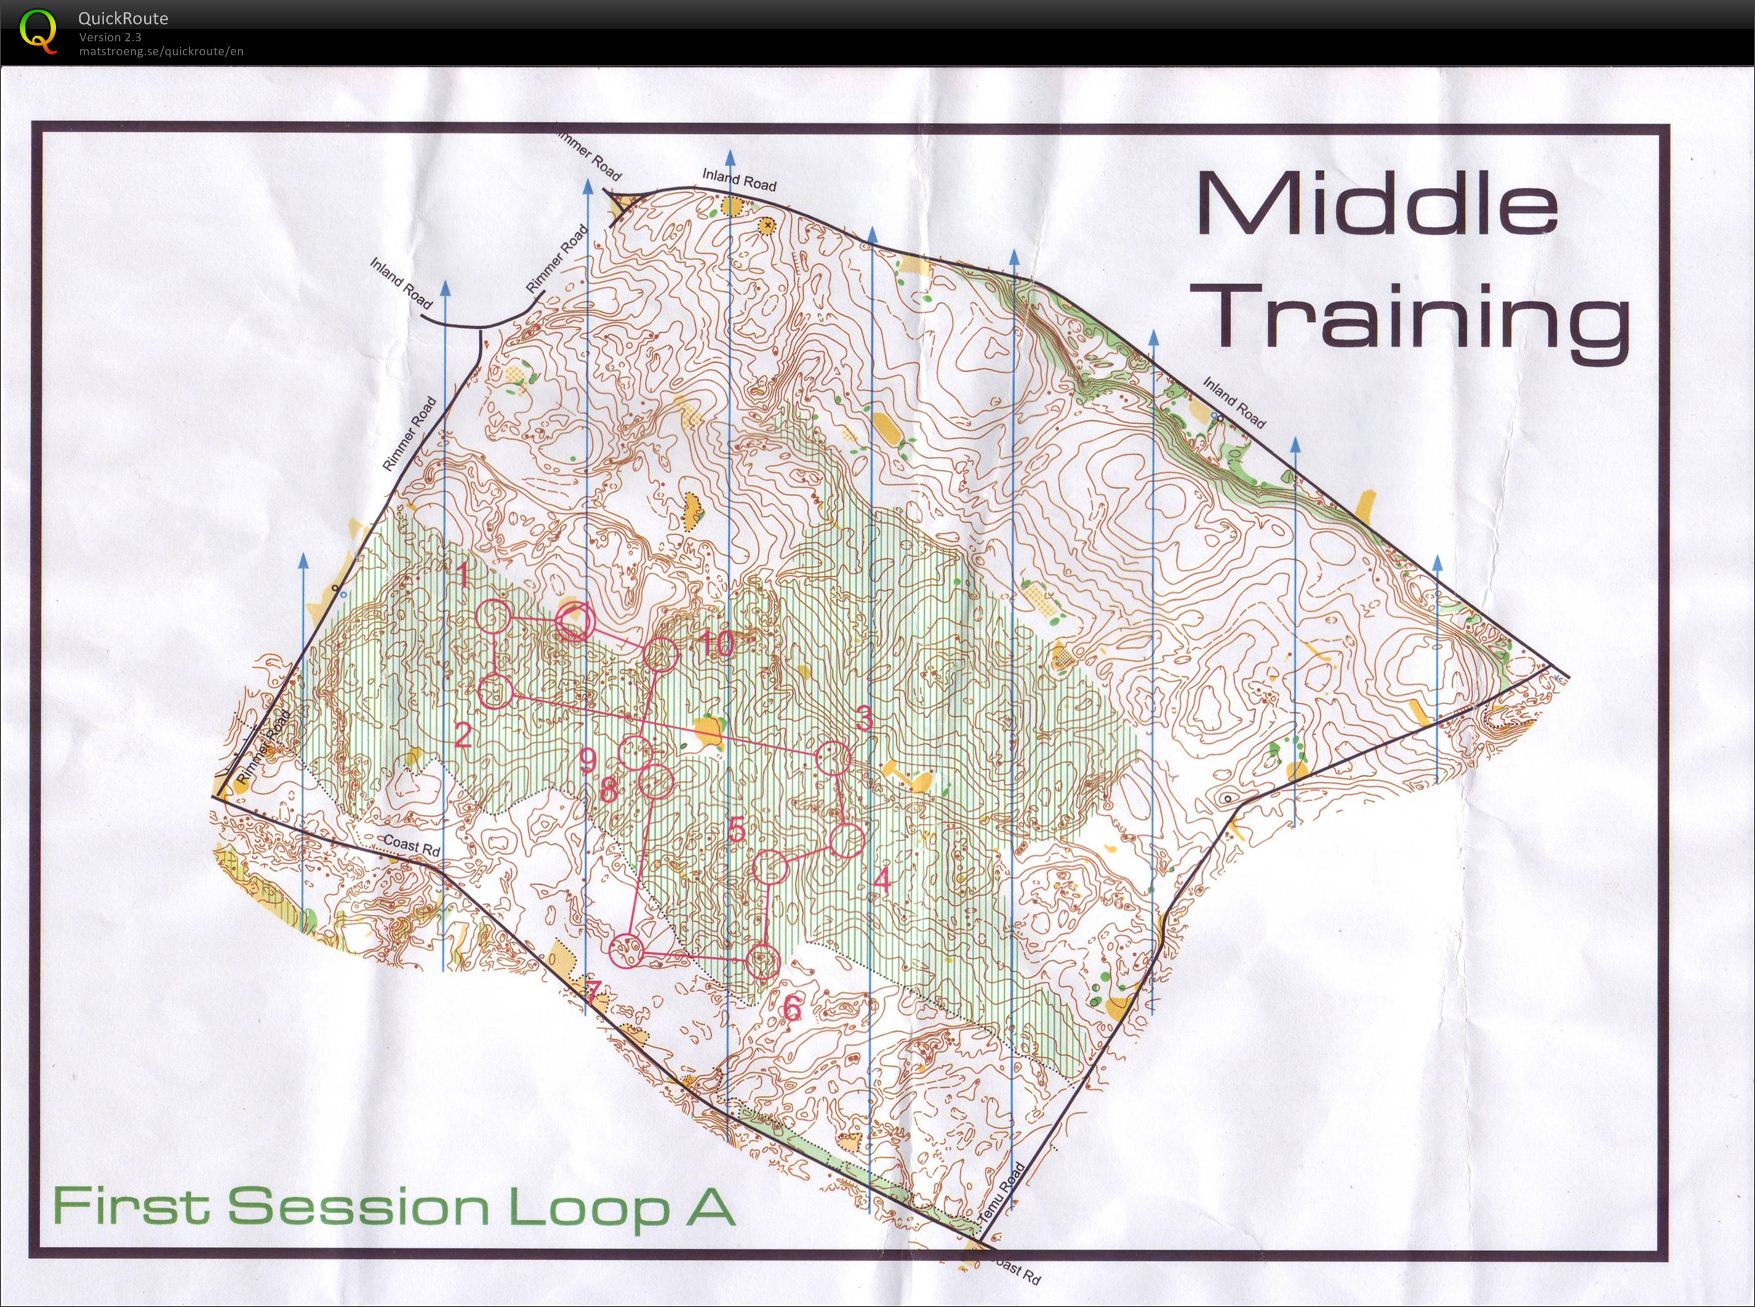 Middle Training - Rimmer Rd (30.03.2012)